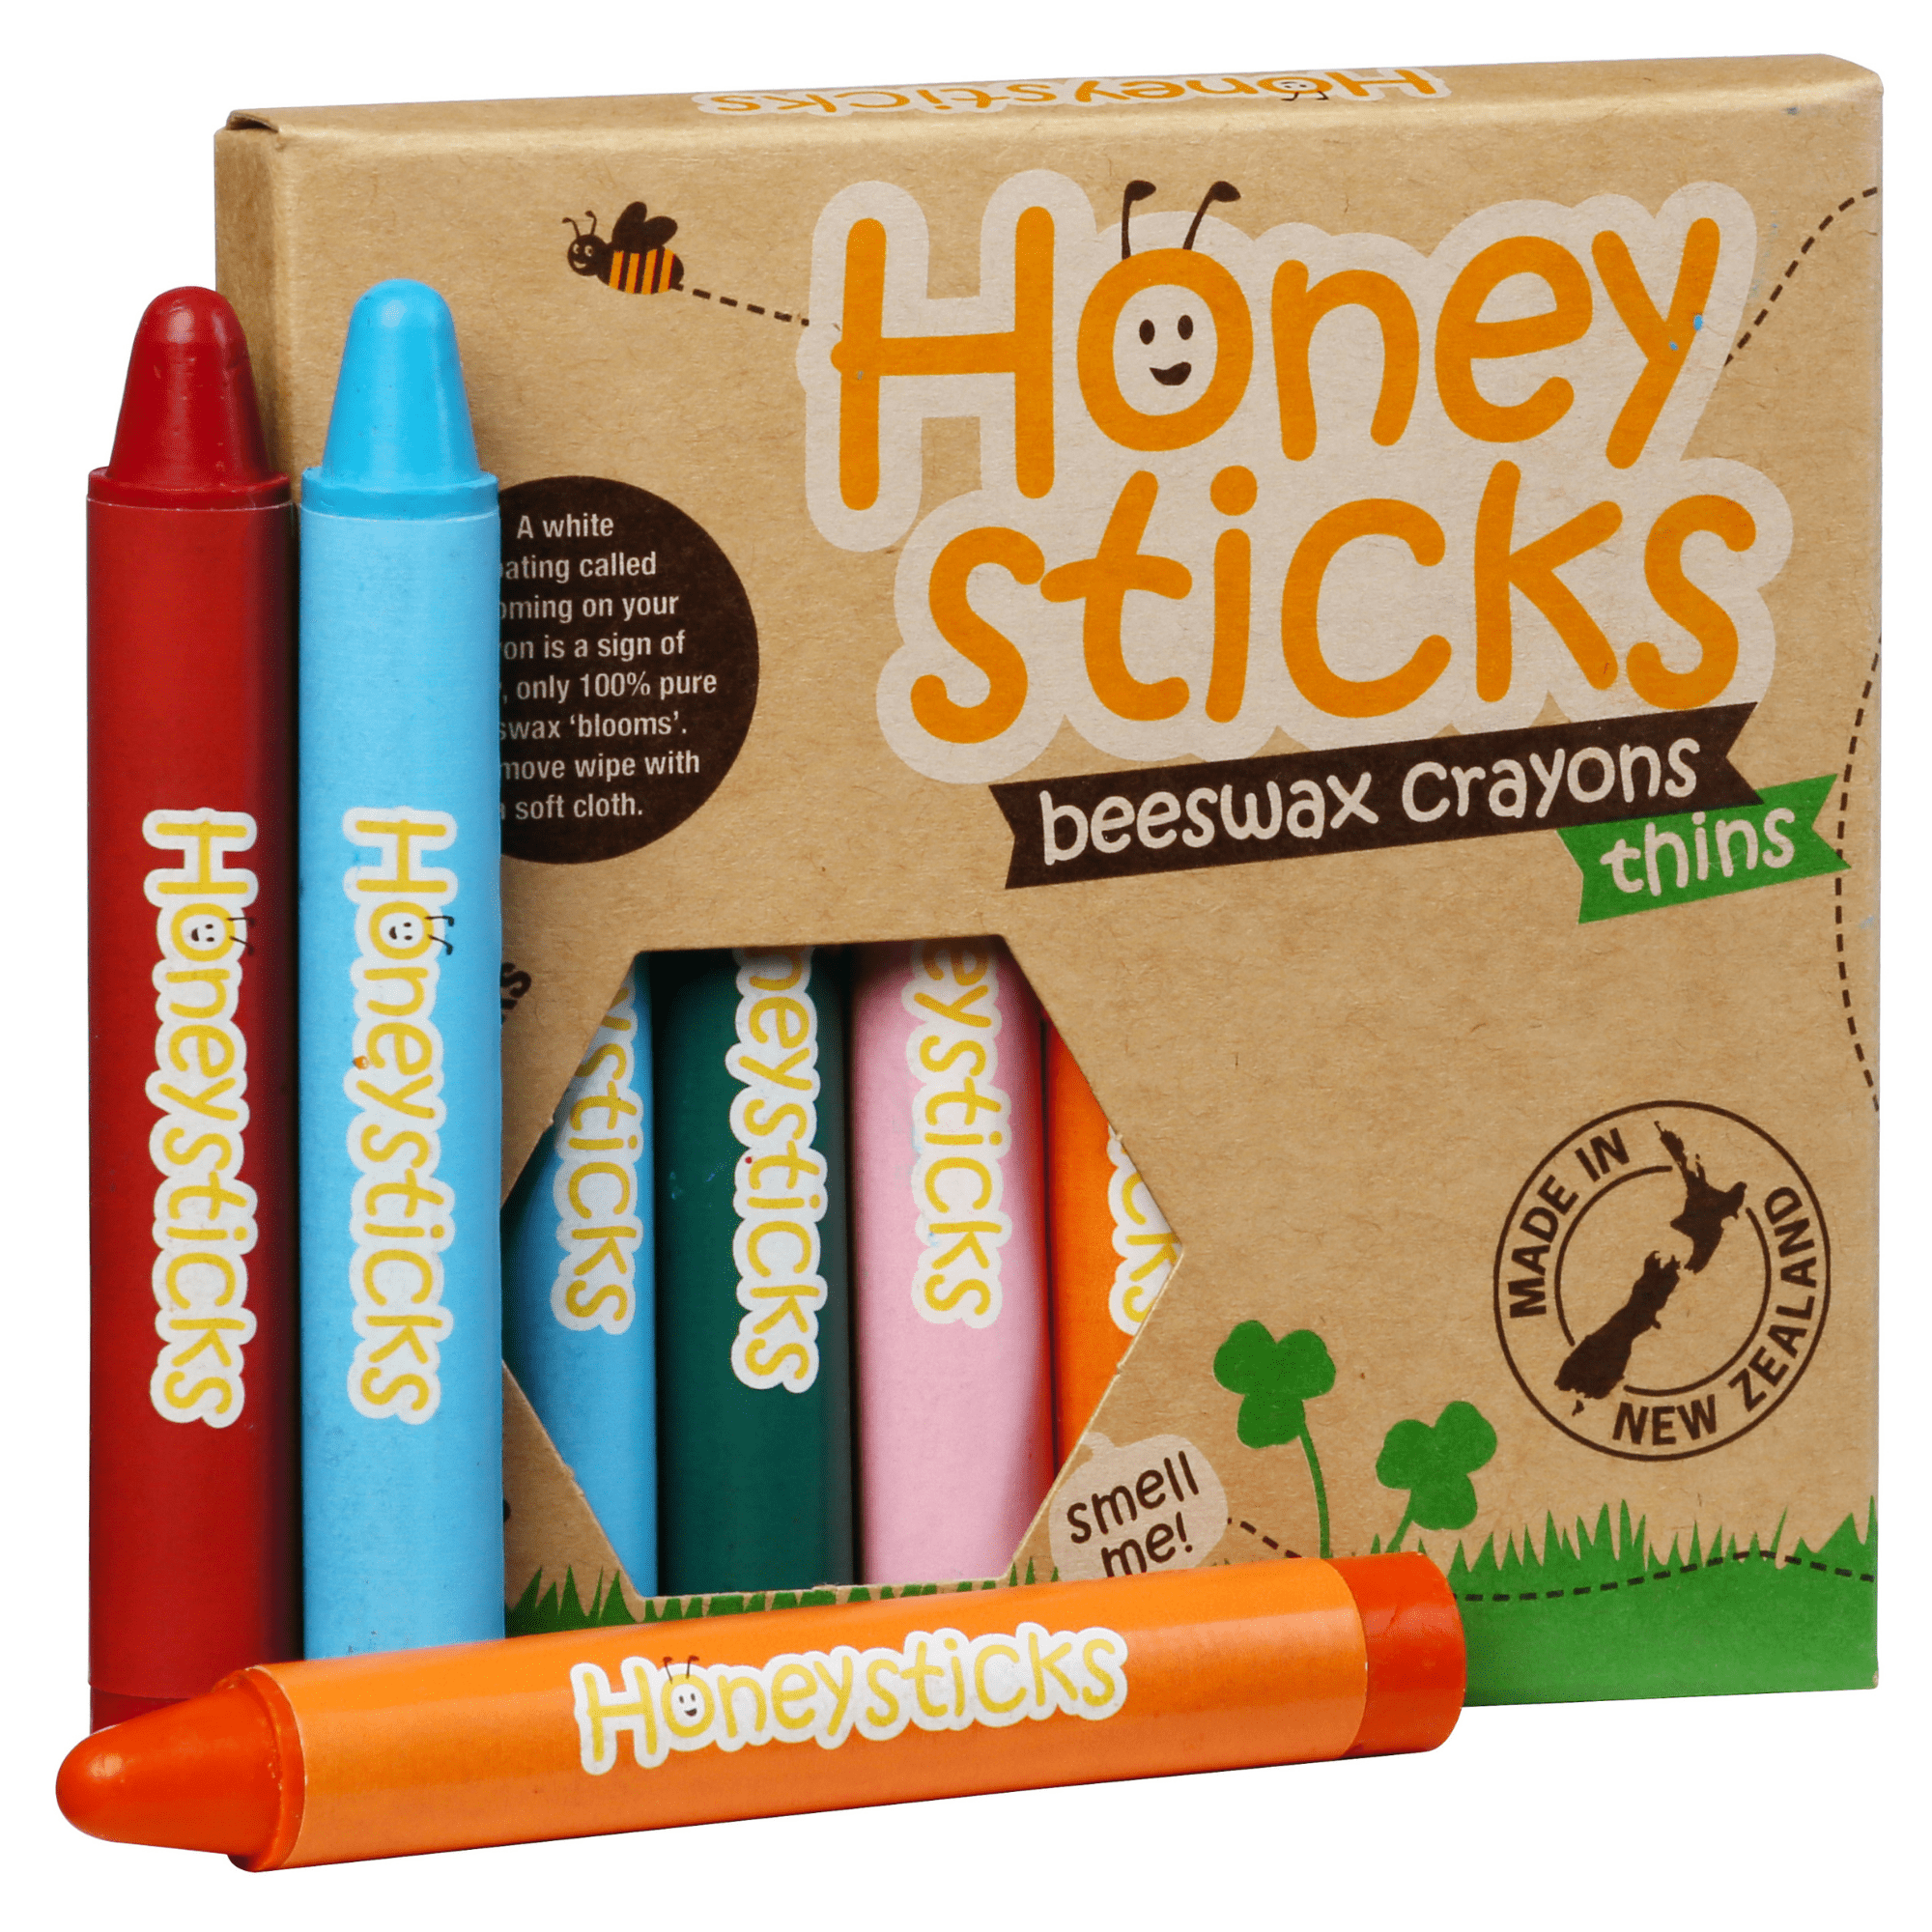  Honeysticks 100% Pure Beeswax Crayons (16 Pack) - Jumbo  Crayons for Toddlers, Kids - Non Toxic, Food Grade Colors, Large Size is  Easy to Hold and Use PLUS Premium Recycled